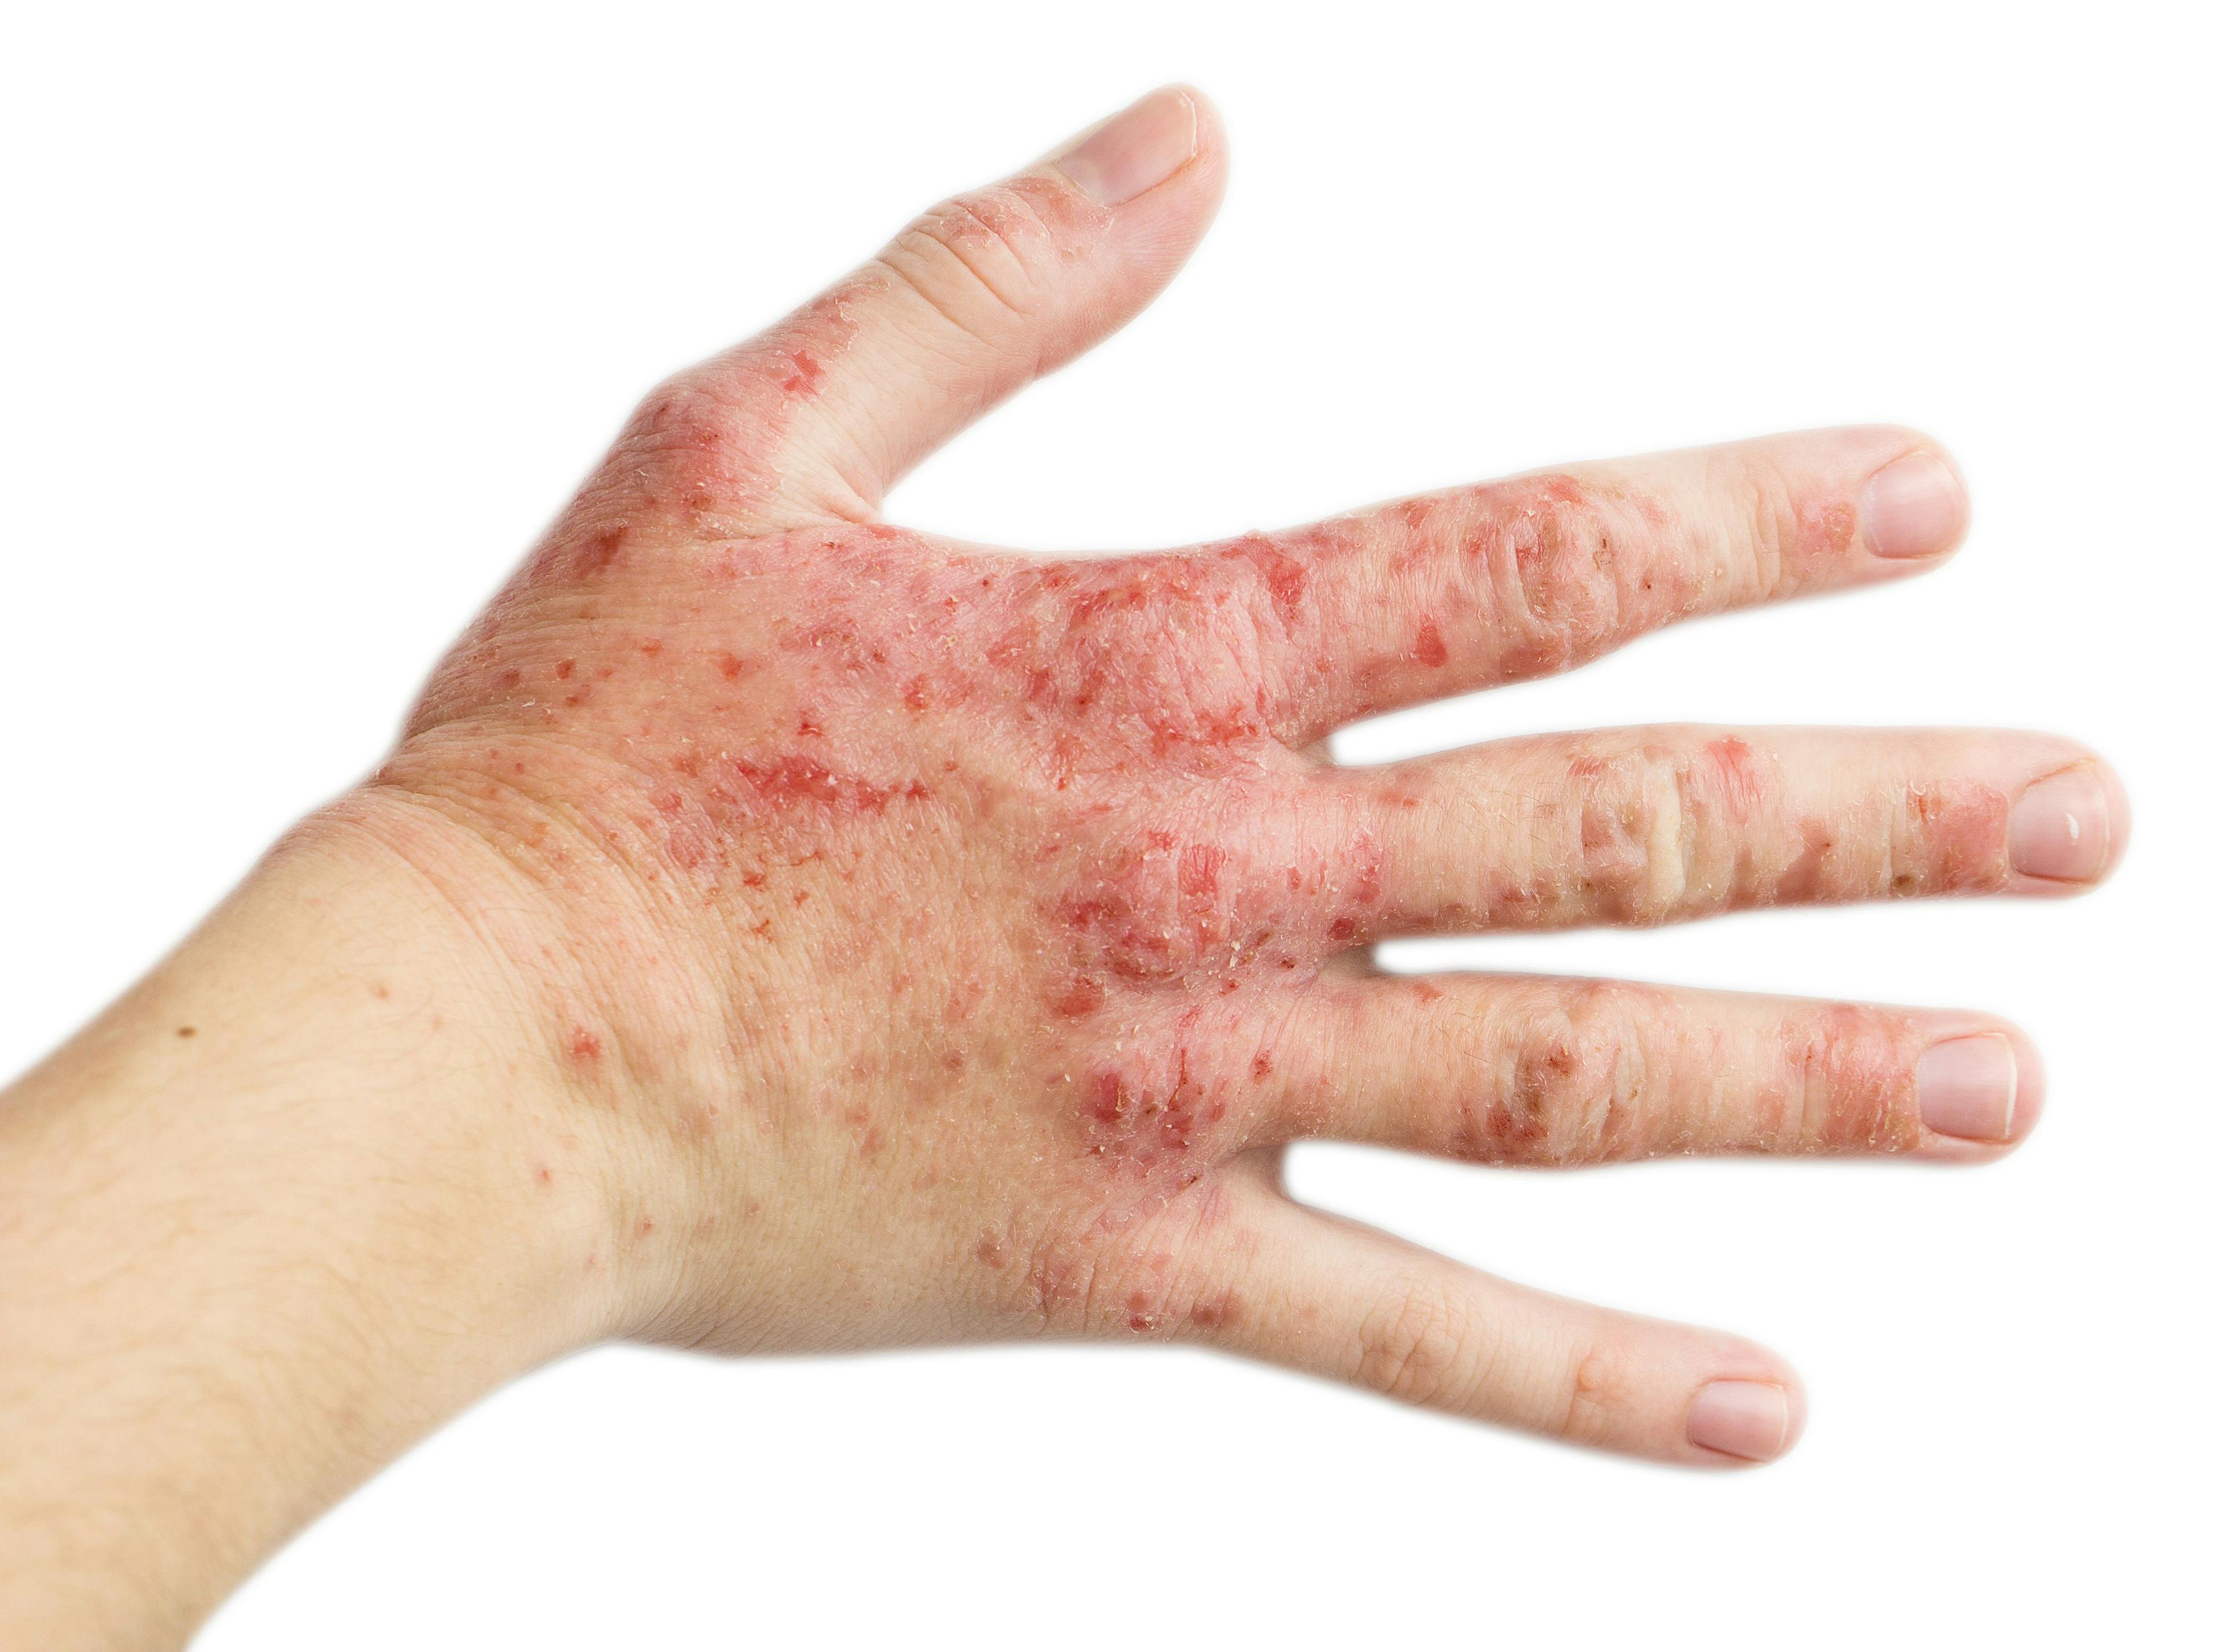 Lebrikizumab With Topical Corticosteroid Meets Primary Endpoints for Atopic Dermatitis